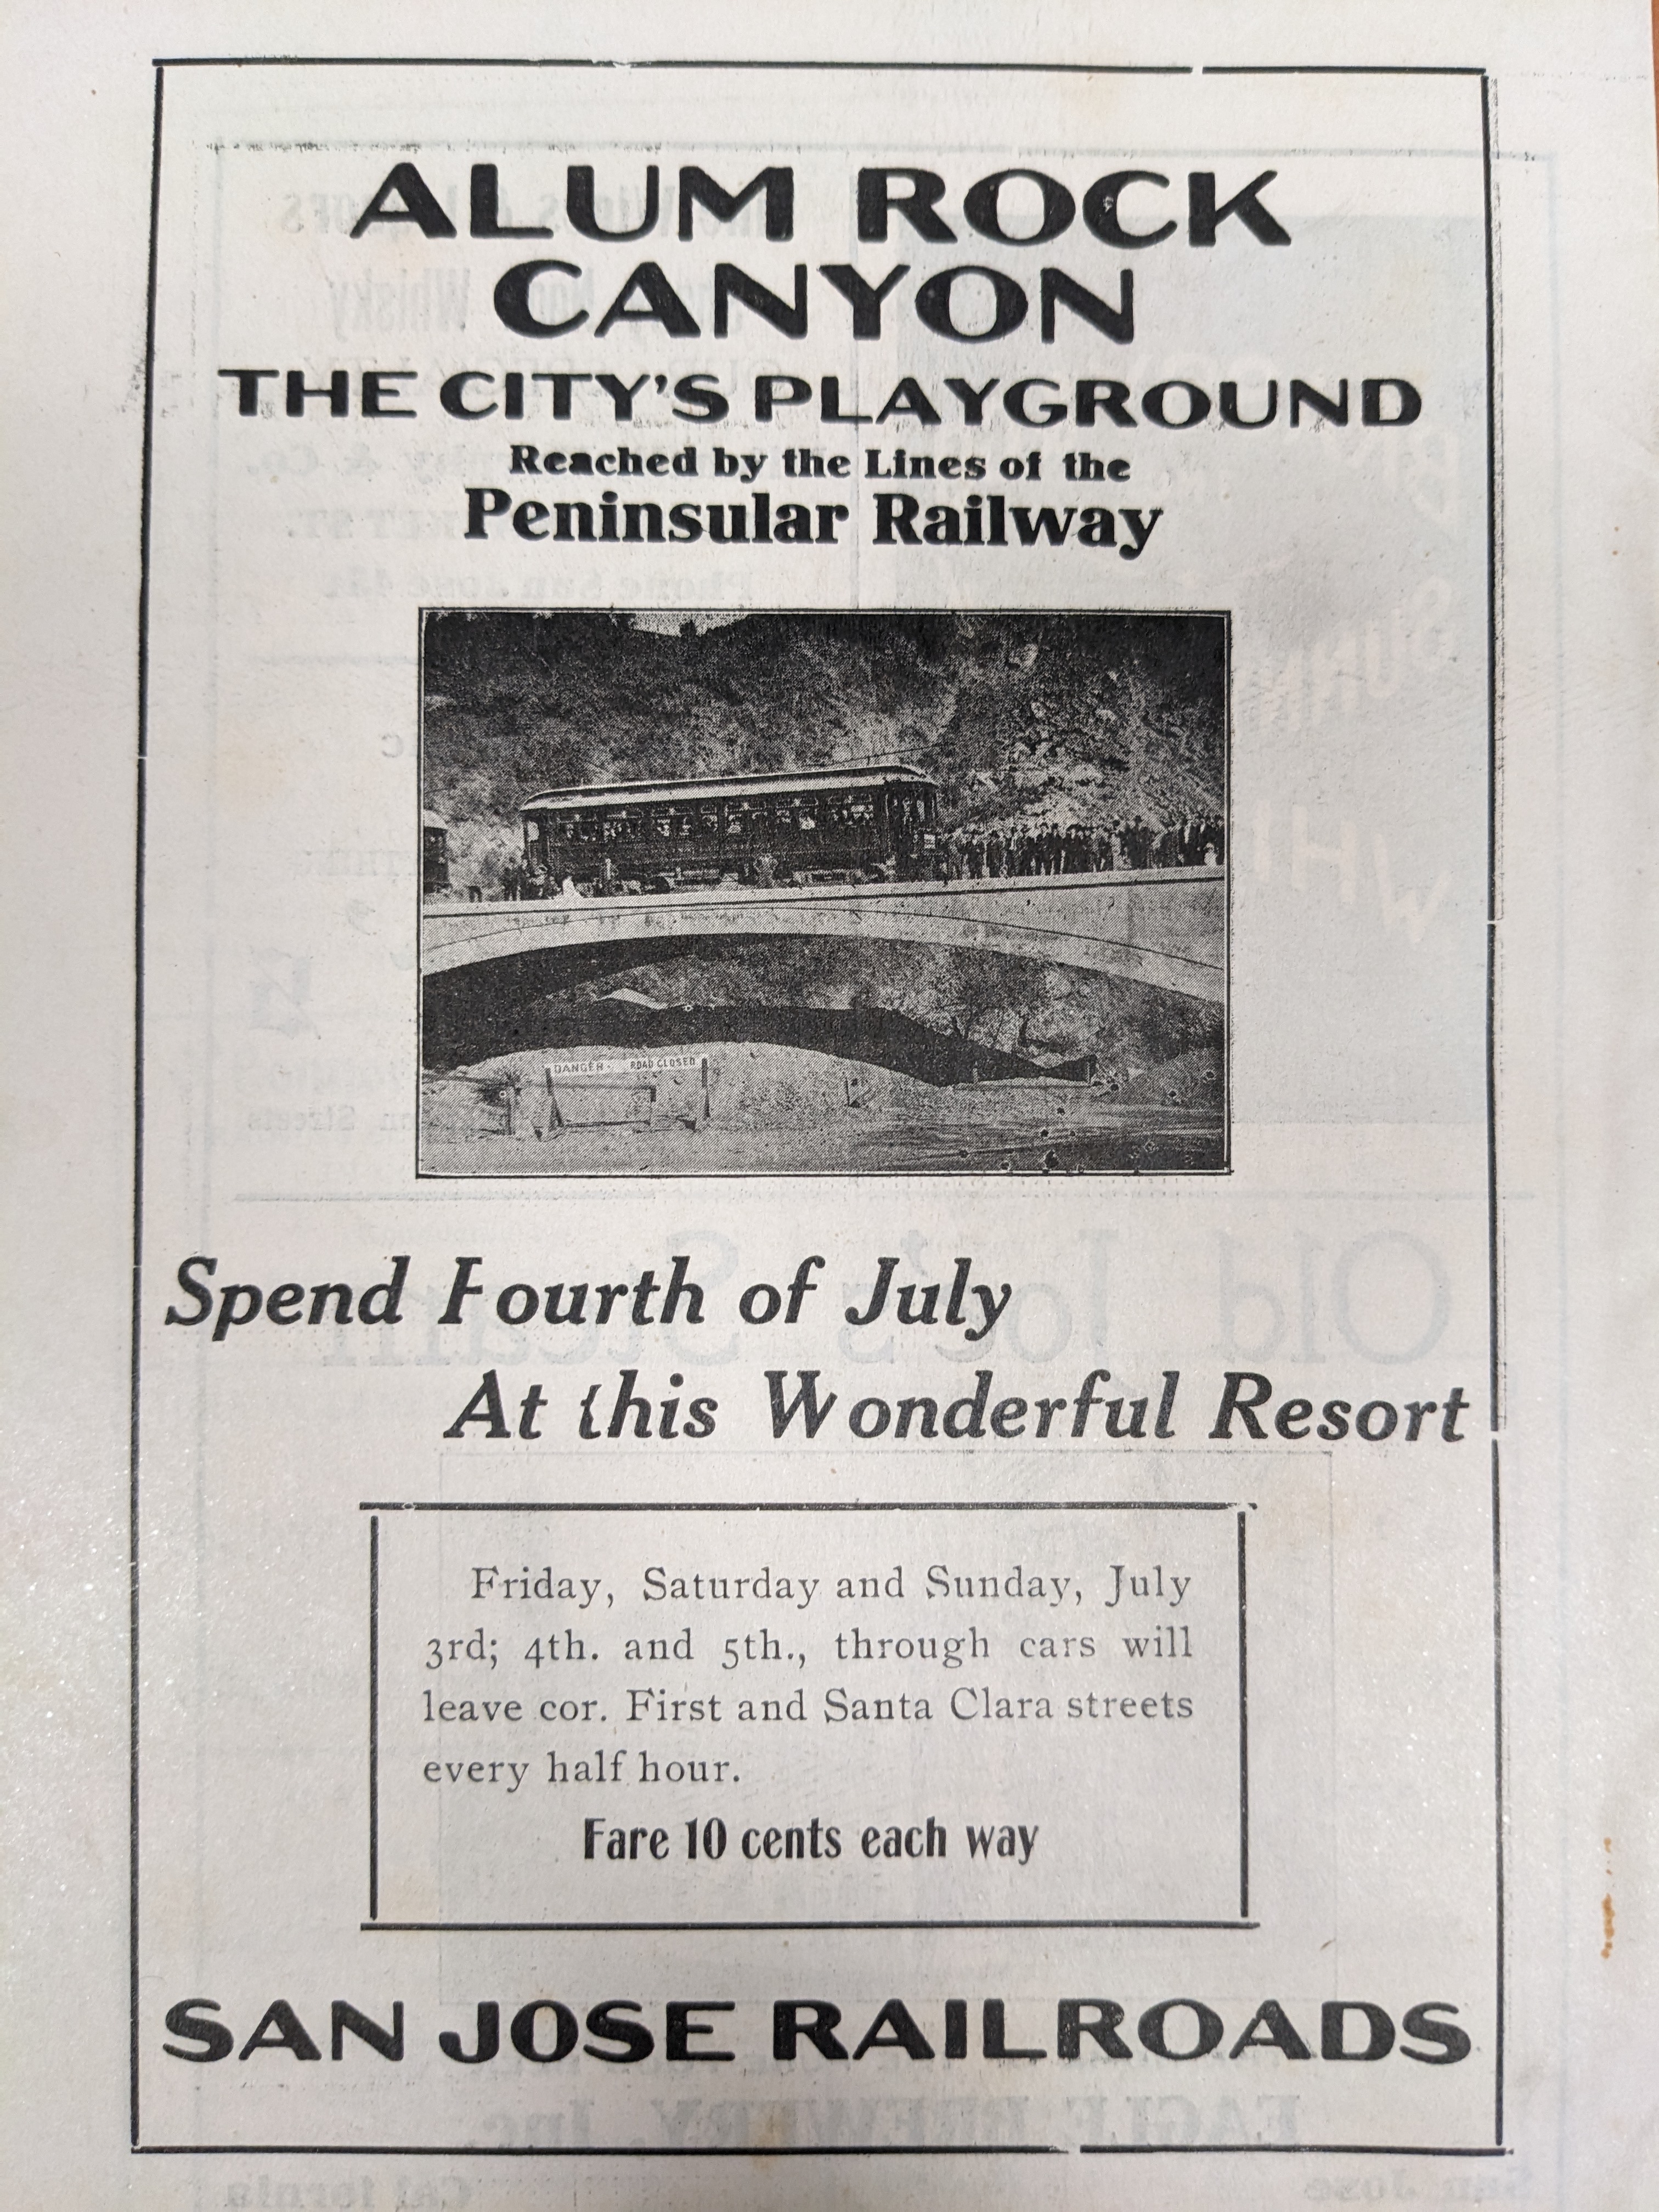 Advertisement for trolley and July 4 celebration hosted by NSGW / NDGW at ARP